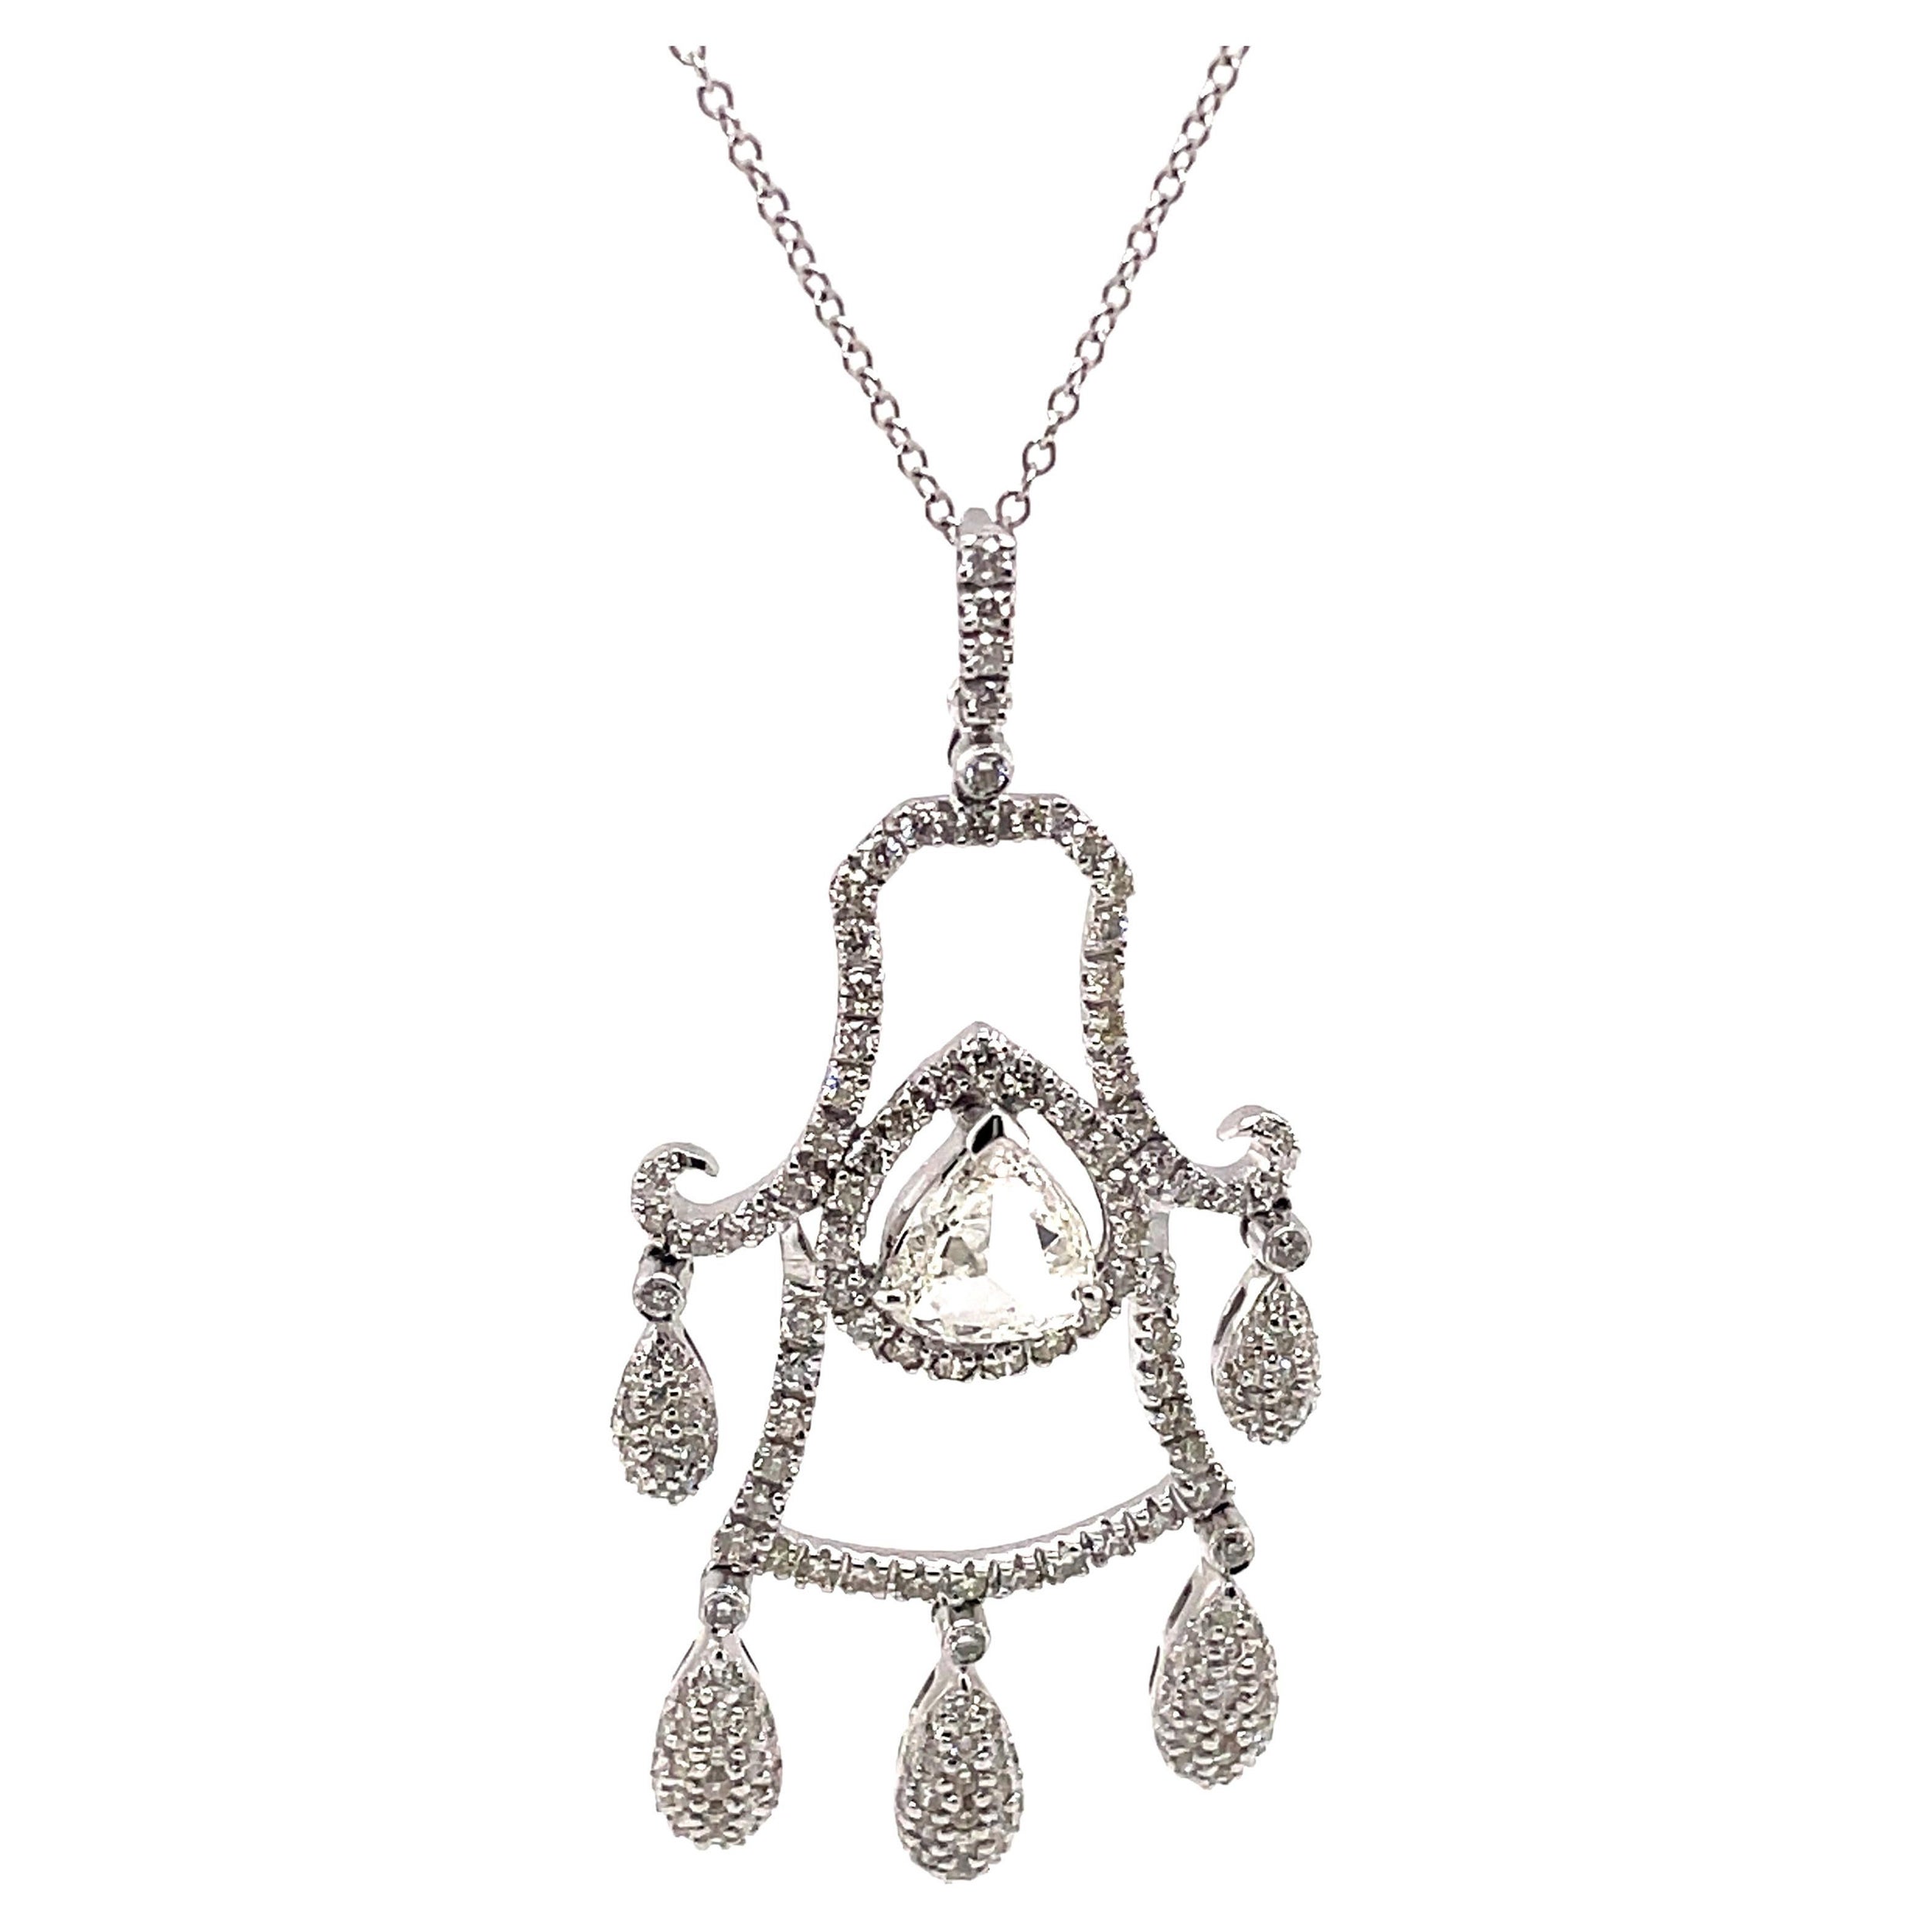 2.64ct Rose Cut and Round Diamond Pendant Necklace 18k White Gold